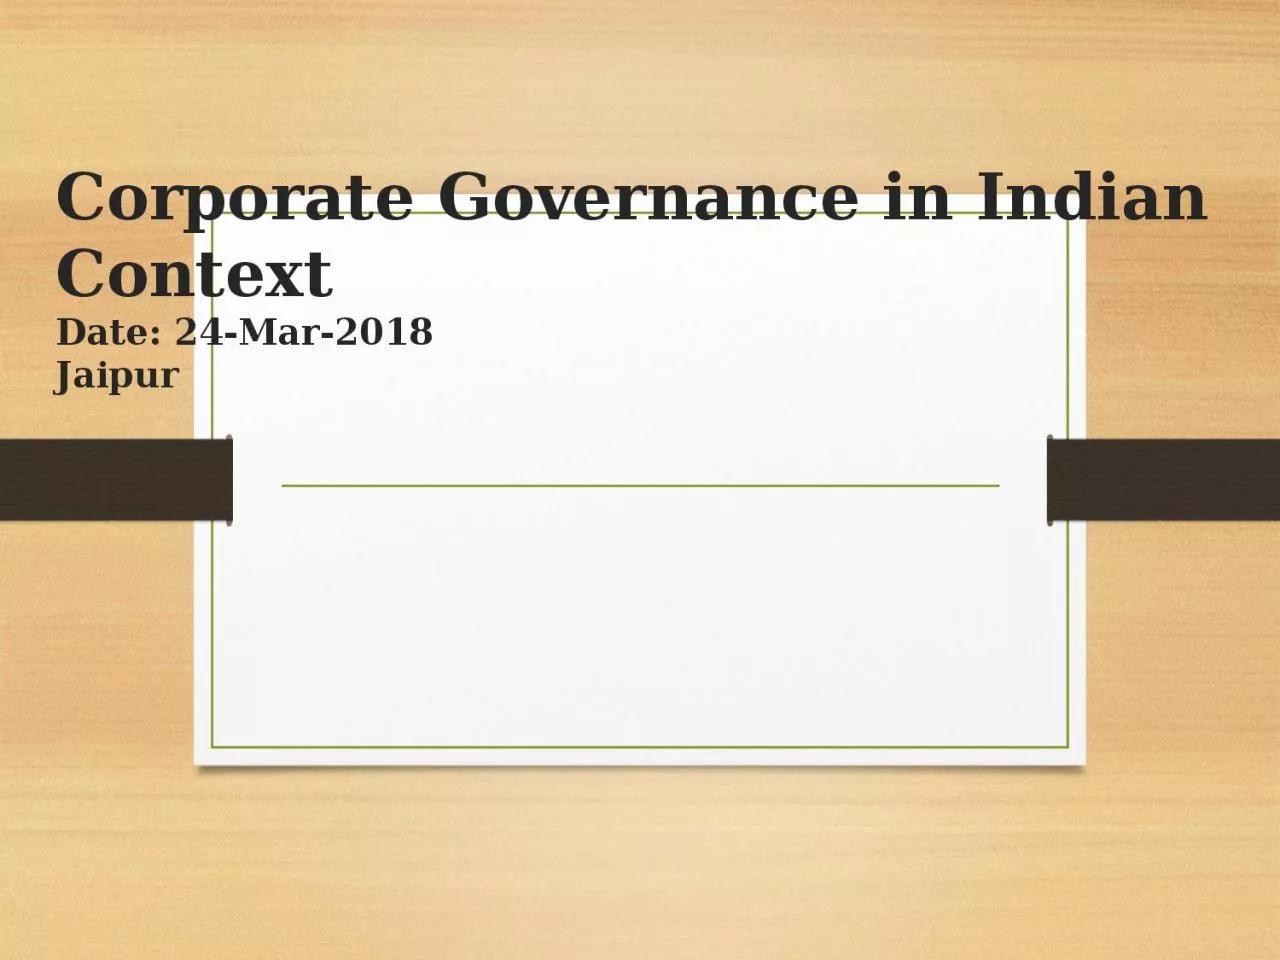 Corporate Governance in Indian Context